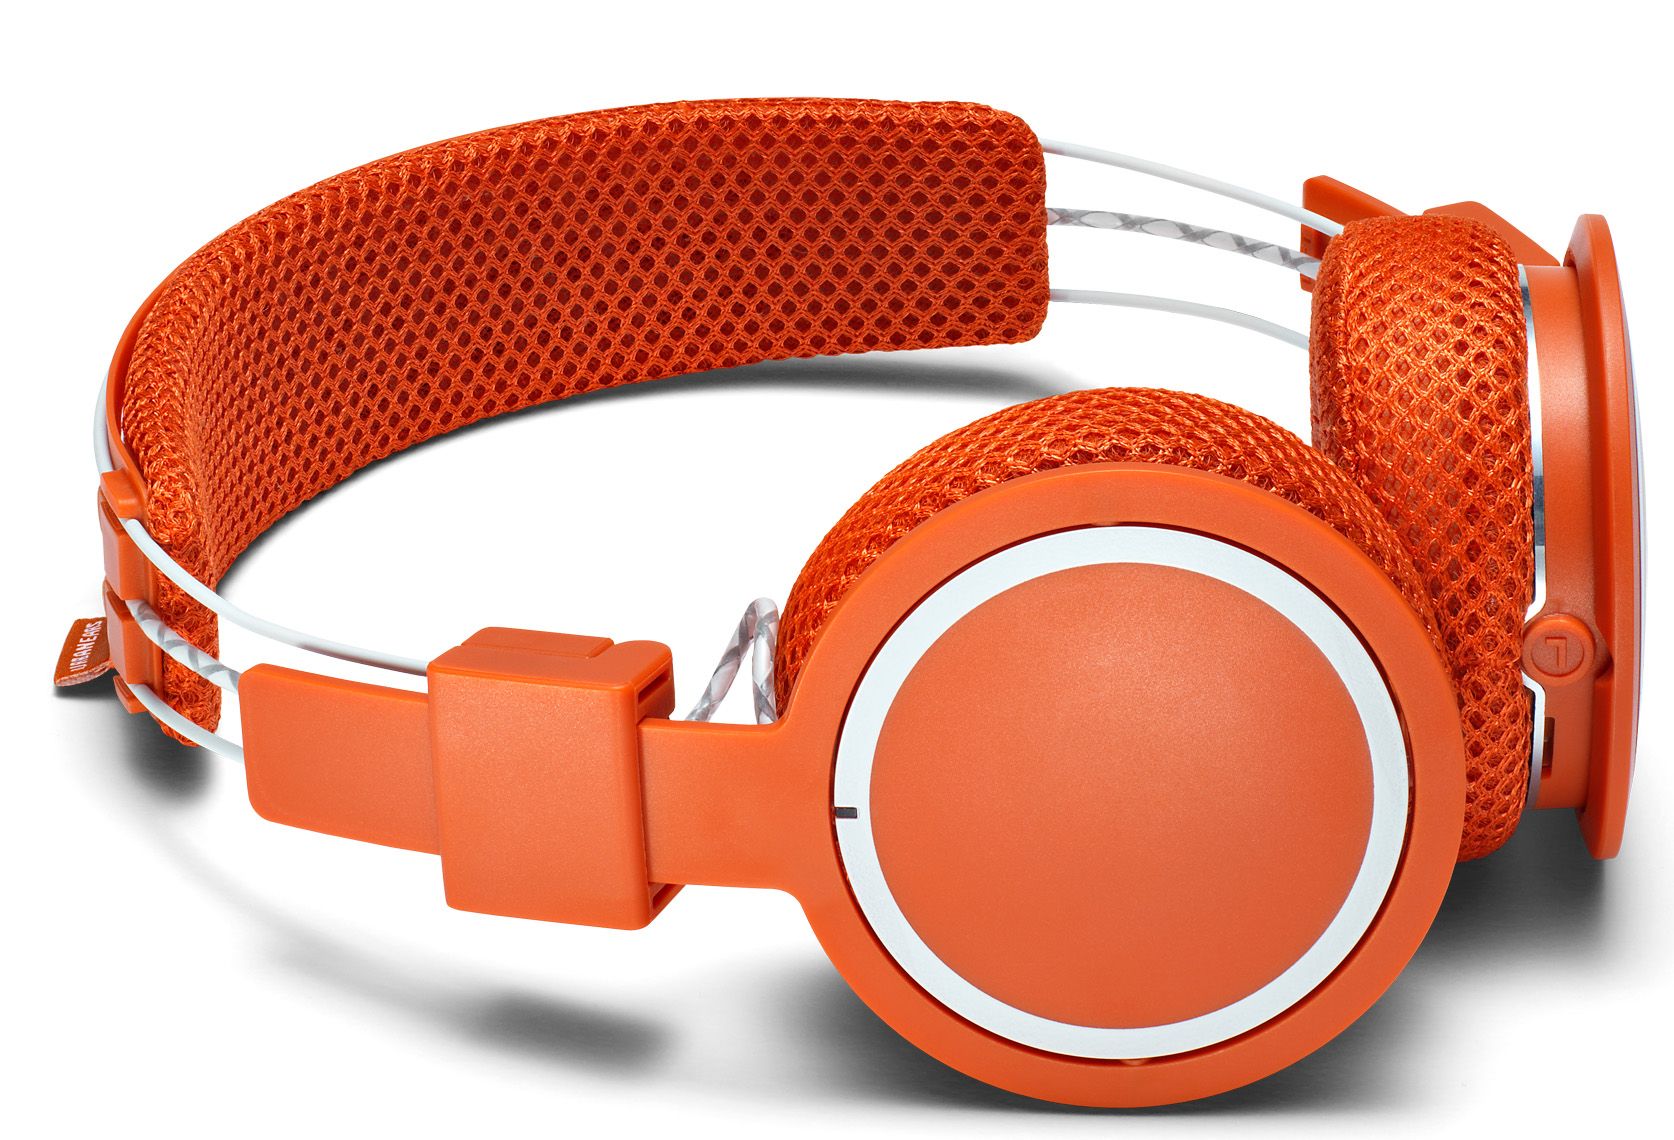 urbanears turned its active hellas headphones clay red for roland garros image 1